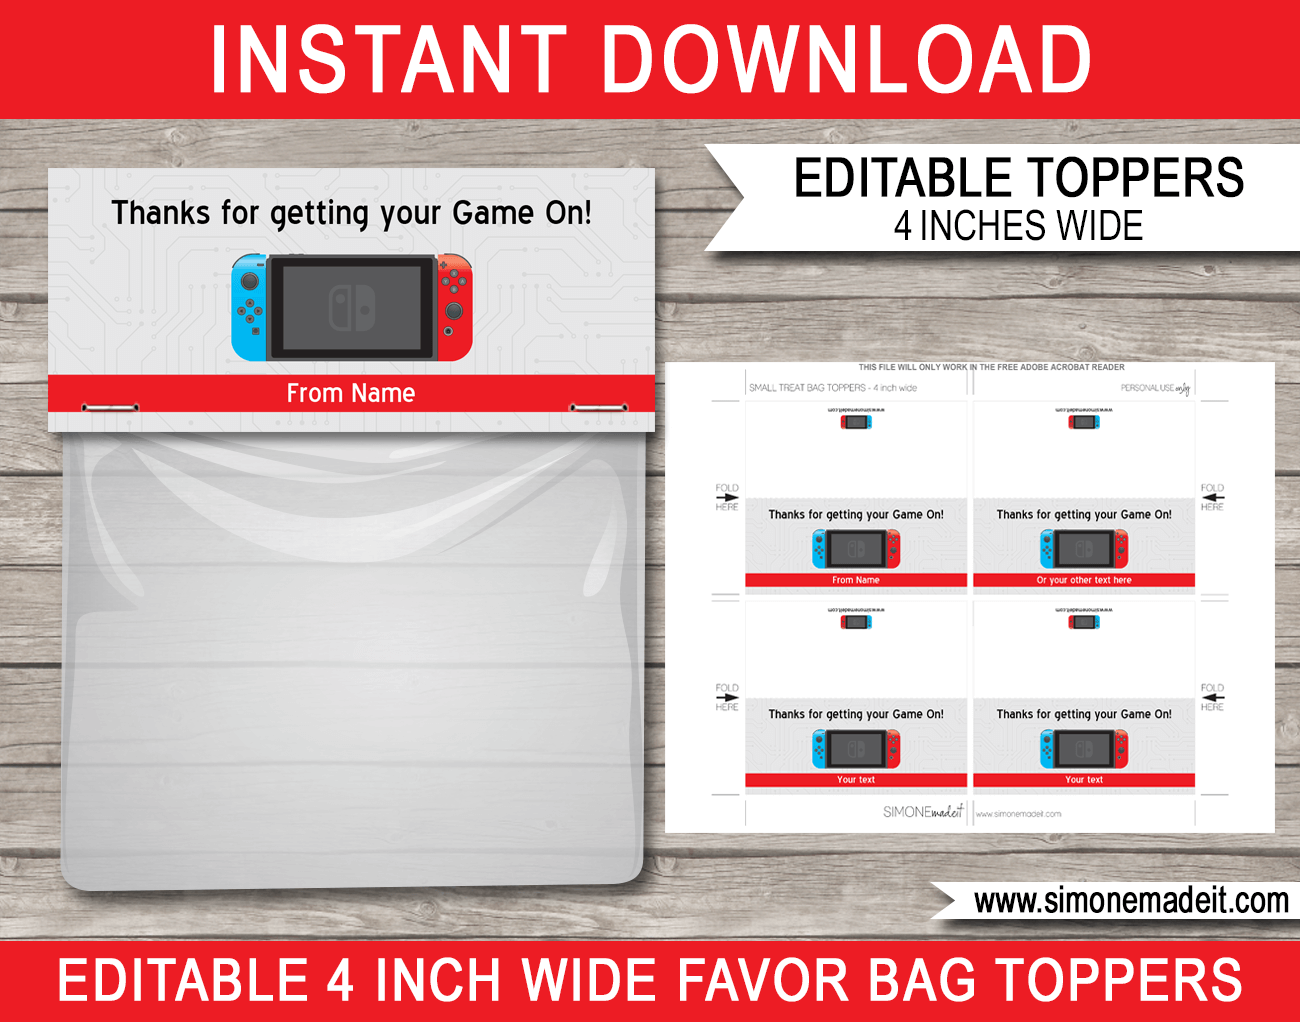 Nintendo Switch Party Favor Bag Toppers | Video Game Birthday Party | Editable DIY Template | $3.00 INSTANT DOWNLOAD via SIMONEmadeit.com